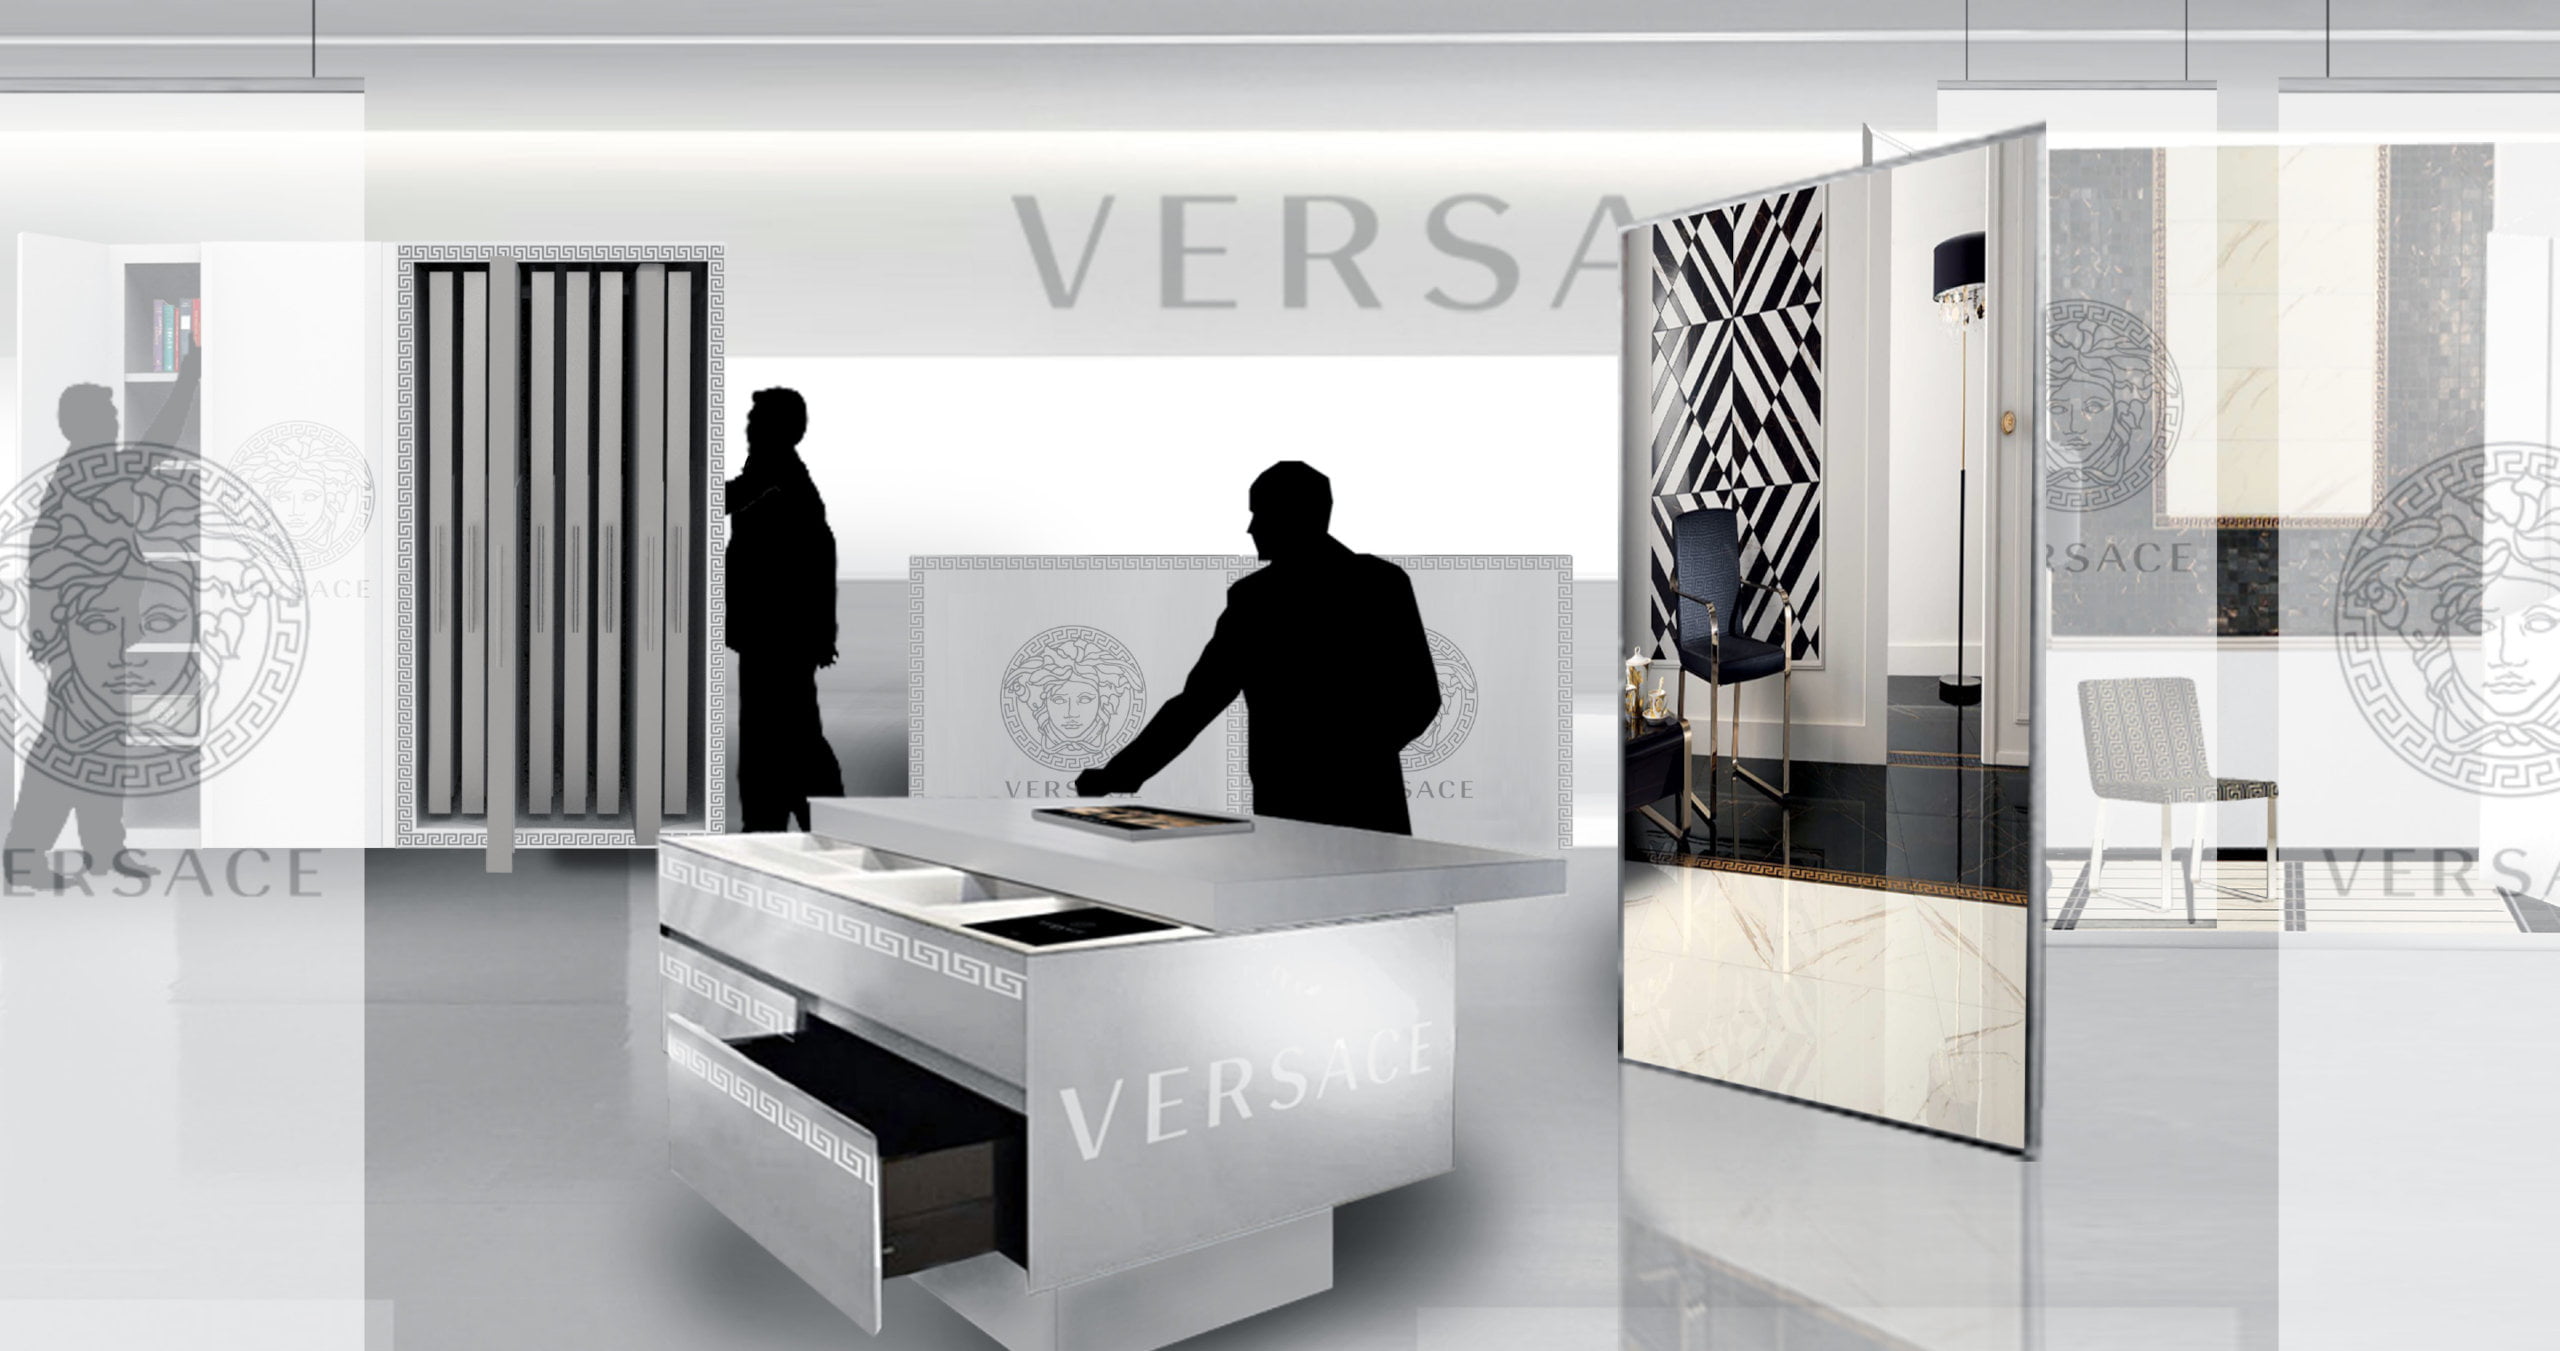 Concept and design of new display cells for the Versace showroom